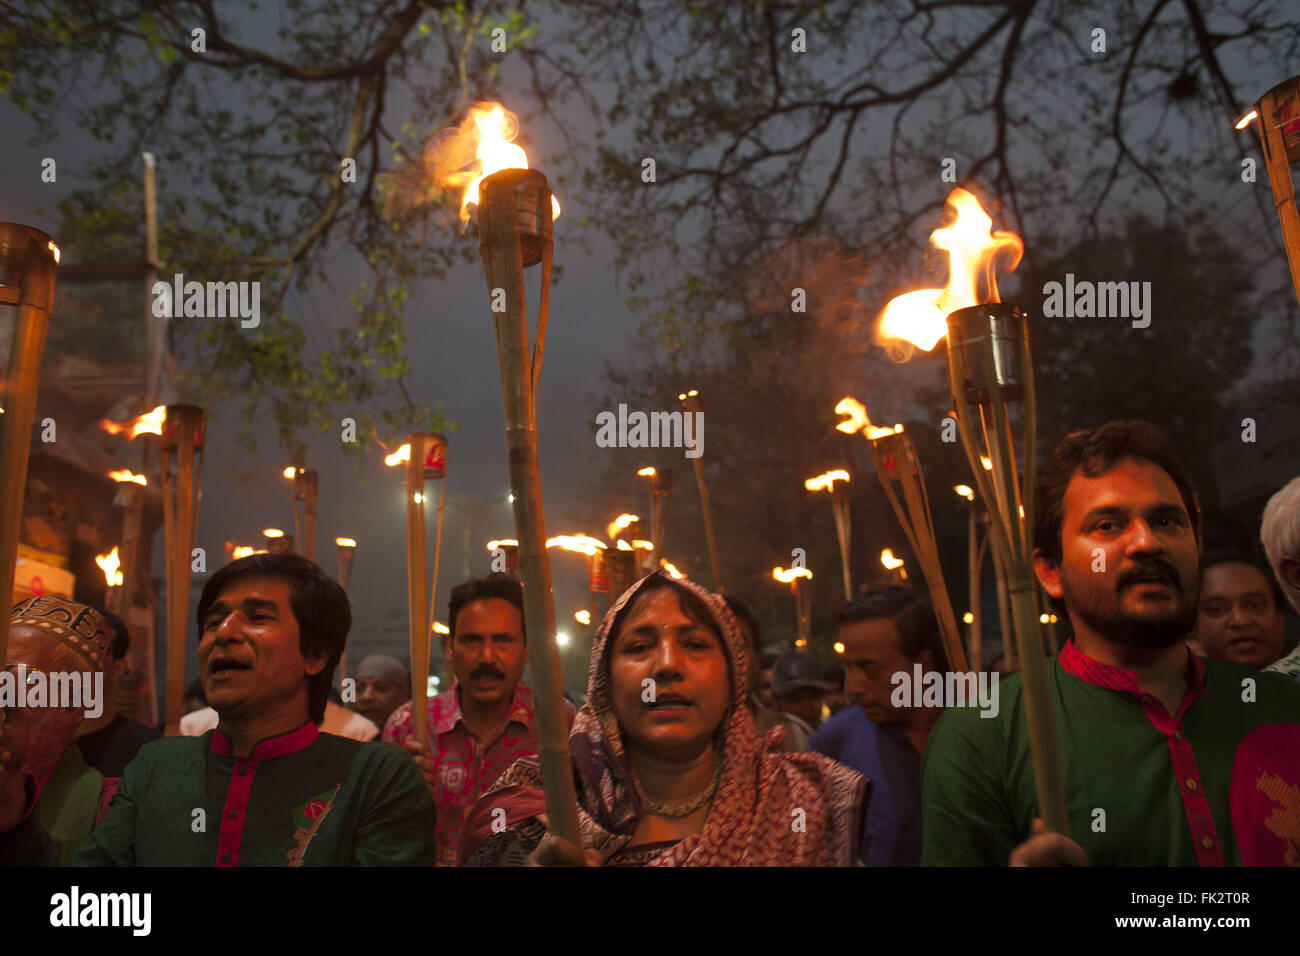 Dhaka, Bangladesh. 6th Mar, 2016. Ganajagaran Mancha takes out a torch procession to protest what it calls conspiracies to save war criminal Mir Quasem Ali, Dhaka, Bangladesh. A second leader of Bangladesh's largest Islamic party has been sentenced to death for war crimes committed during the 1971 war against Pakistan. © Suvra Kanti Das/ZUMA Wire/Alamy Live News Stock Photo